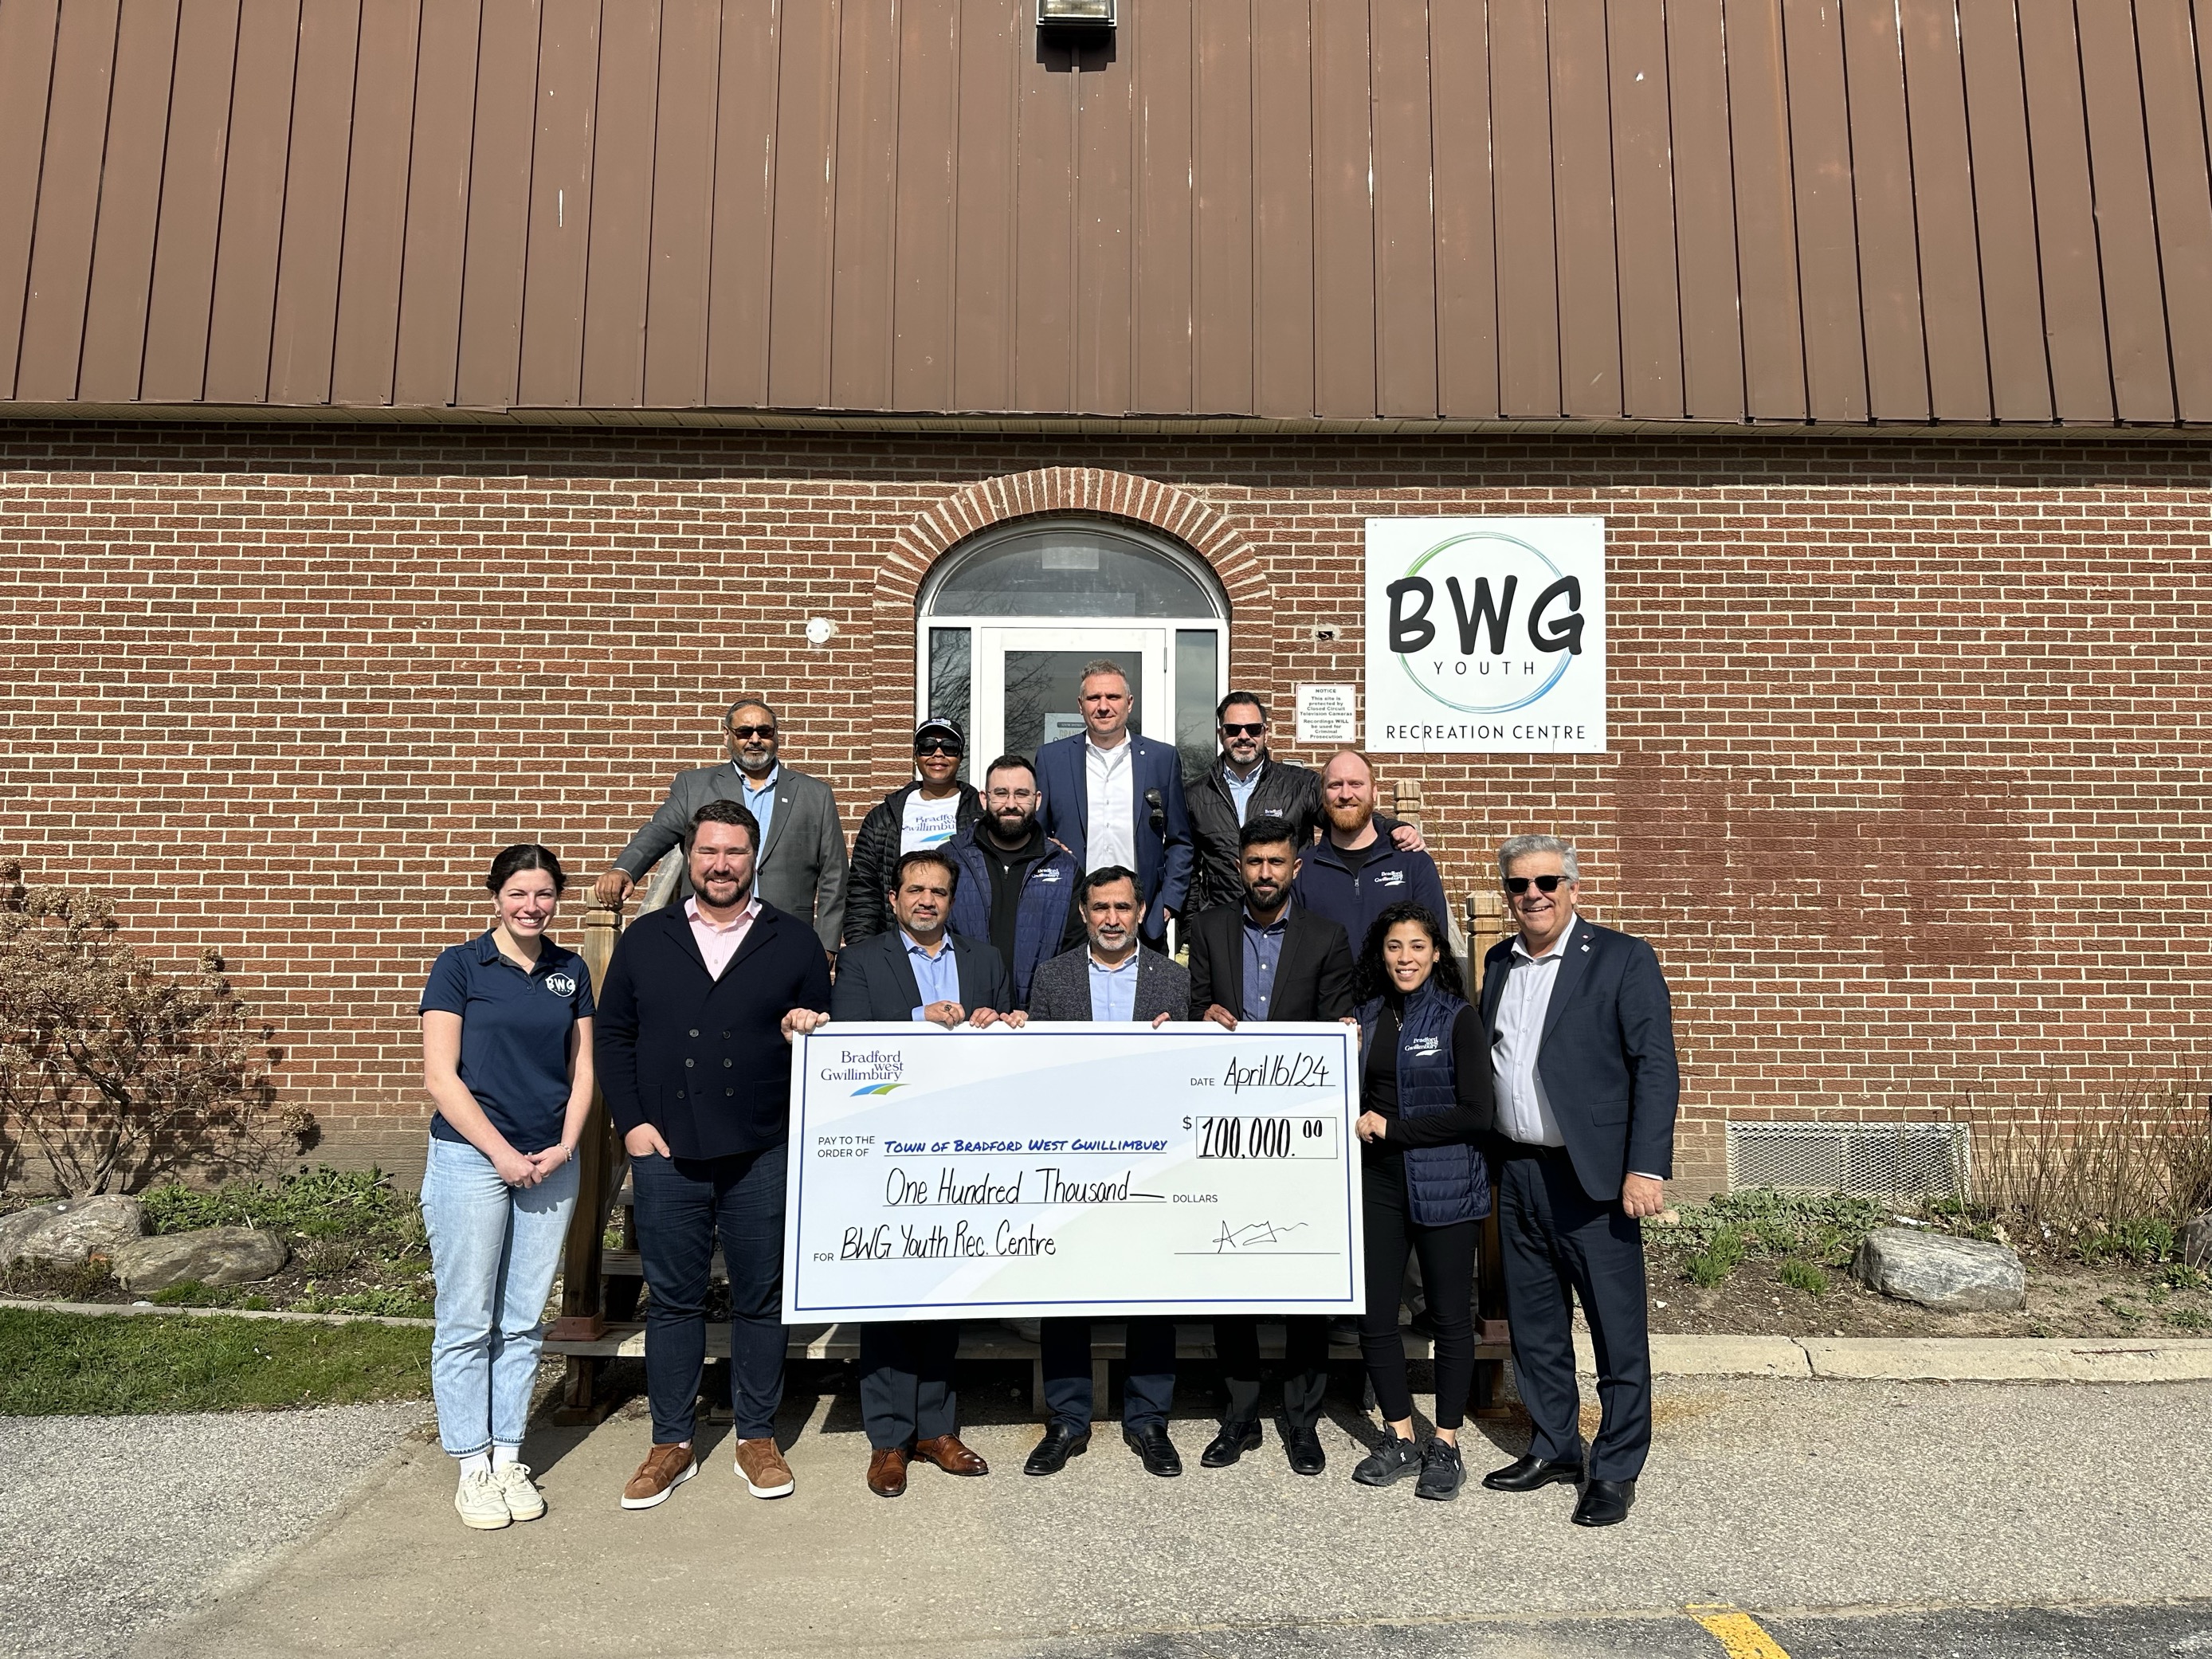 Council, BWG Employees, and Ayaz Ahmed and his business parteners holding up a $100,000 donation cheque outside of the Youth Recreation Centre